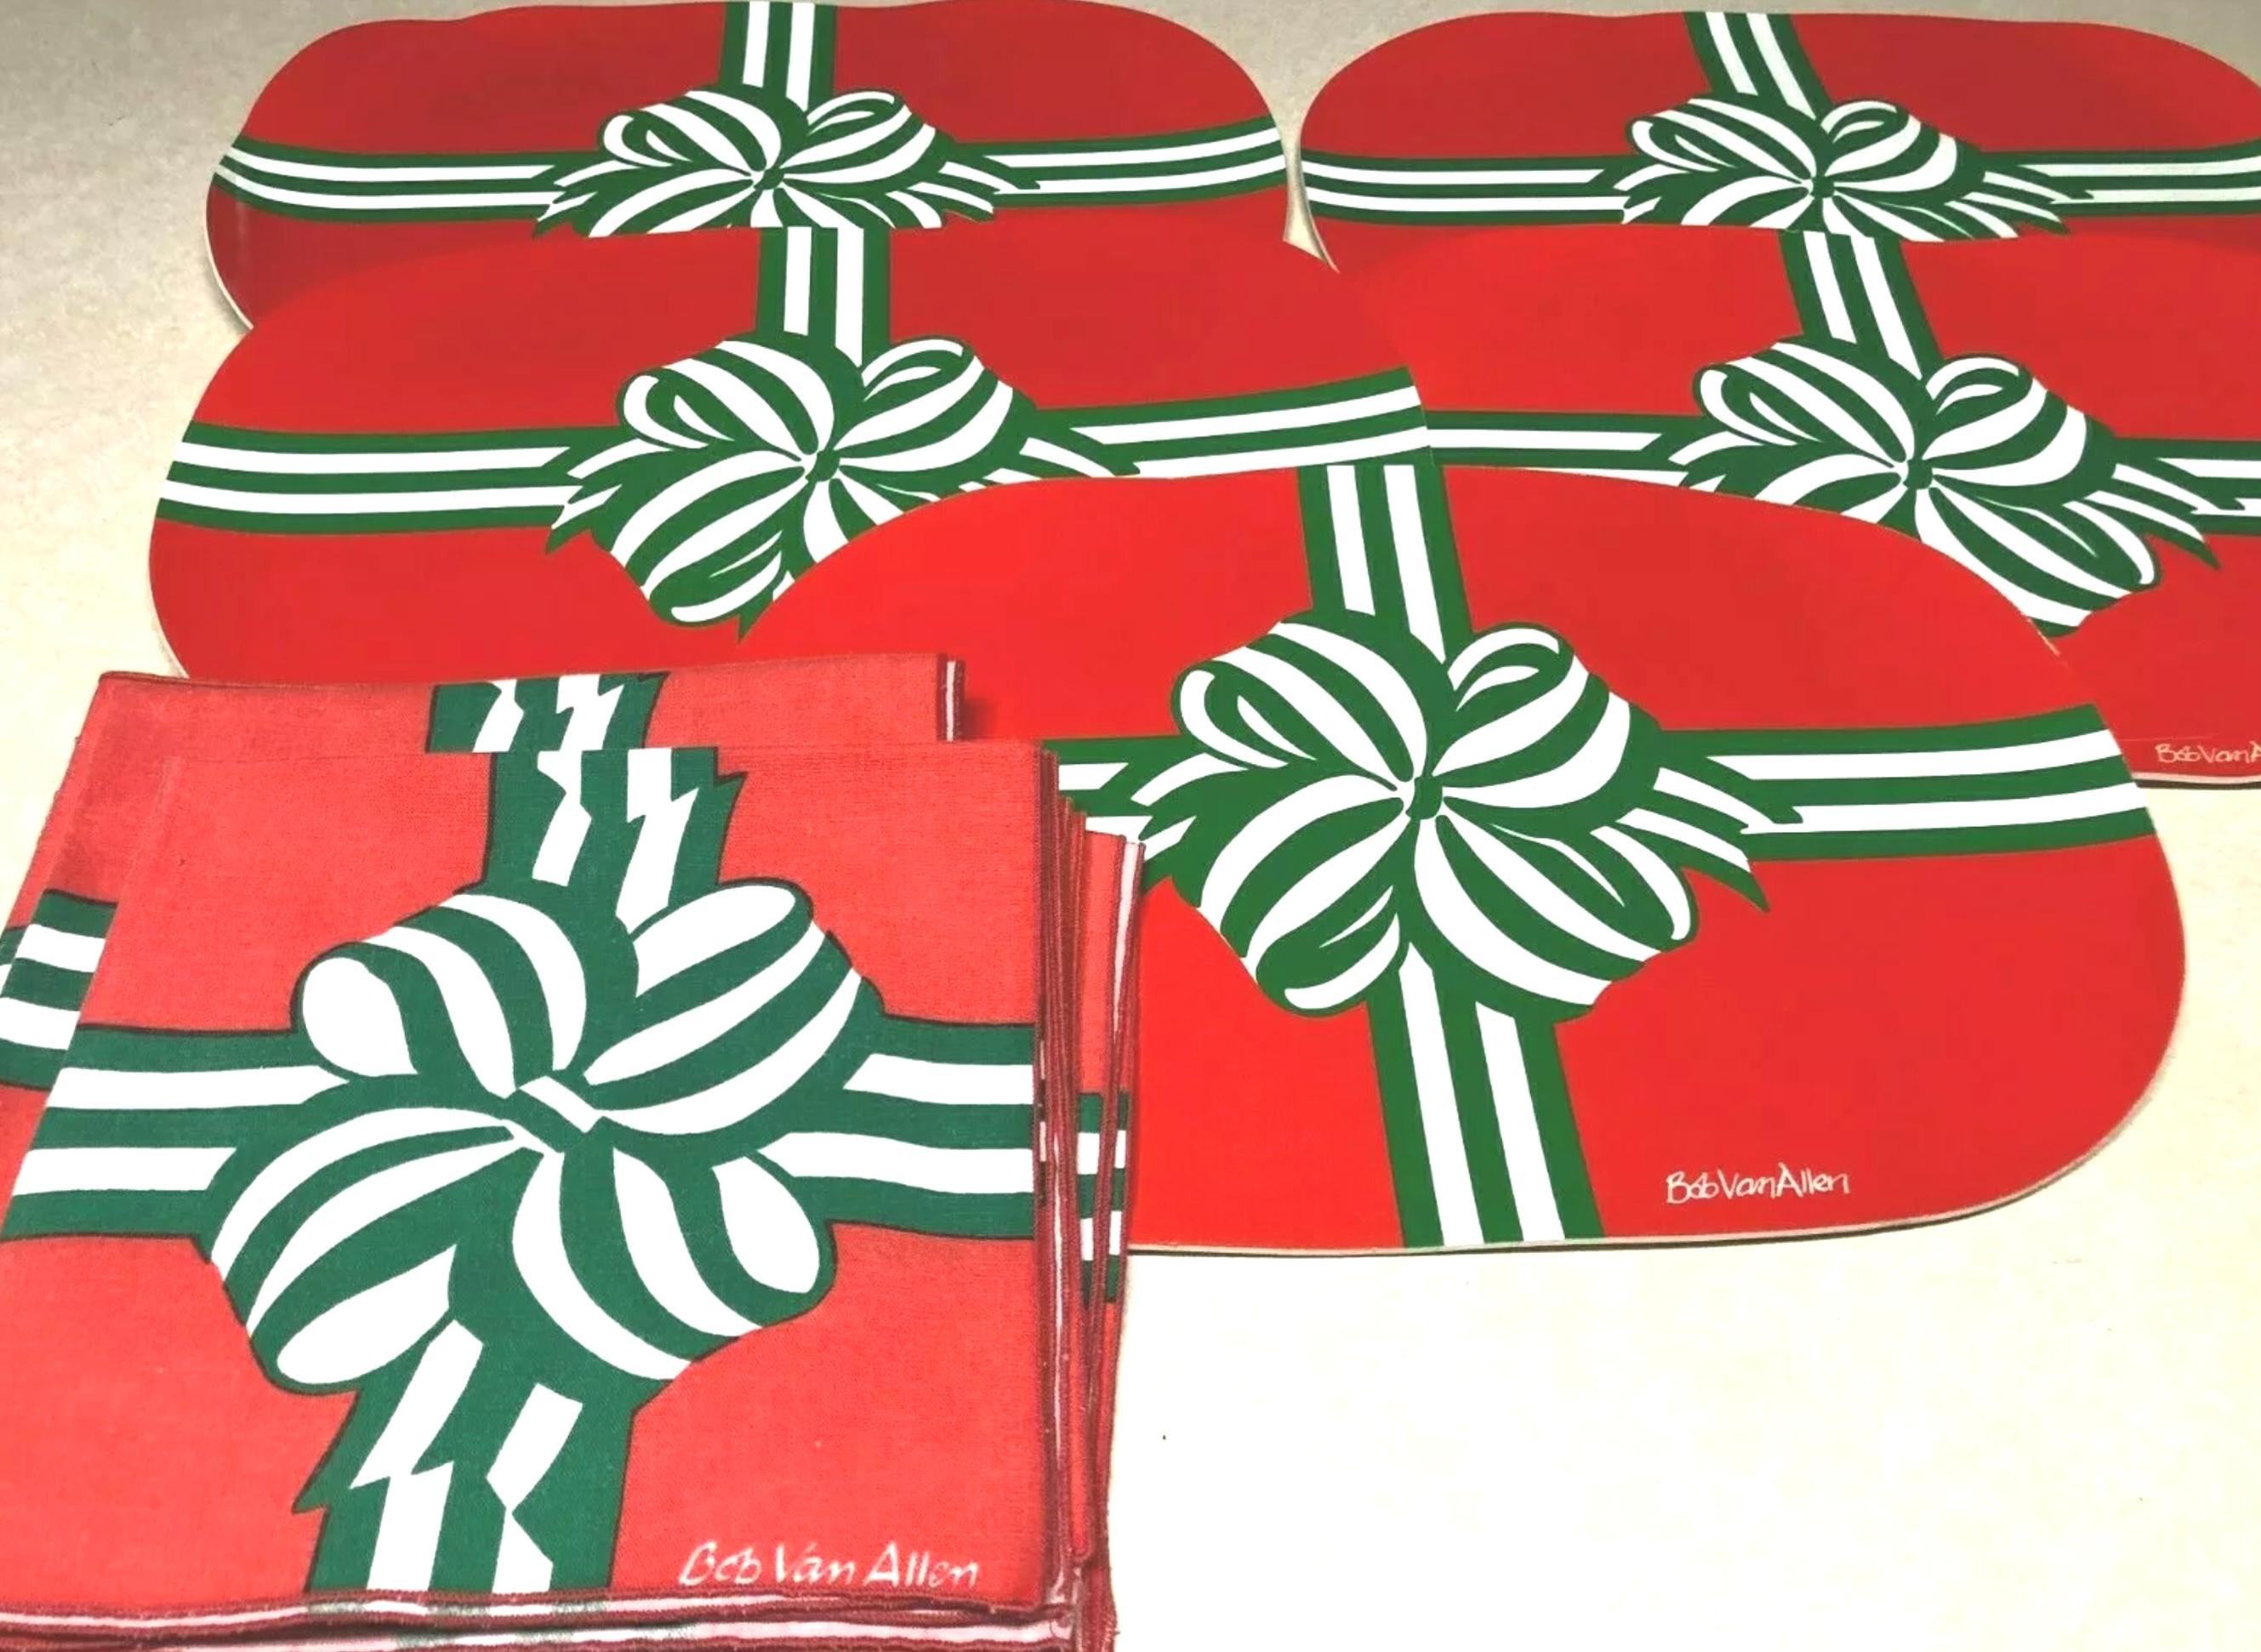 Bob Van Allen holiday bow red & green oval placemat set of 5 & napkin set of 10.
Bob Van Allen holiday/christmas table linens, includes 5 foam backed place mats measuring approximately 17 1/2 x 11 3/4 inches oval, as well as 10 matching napkins,